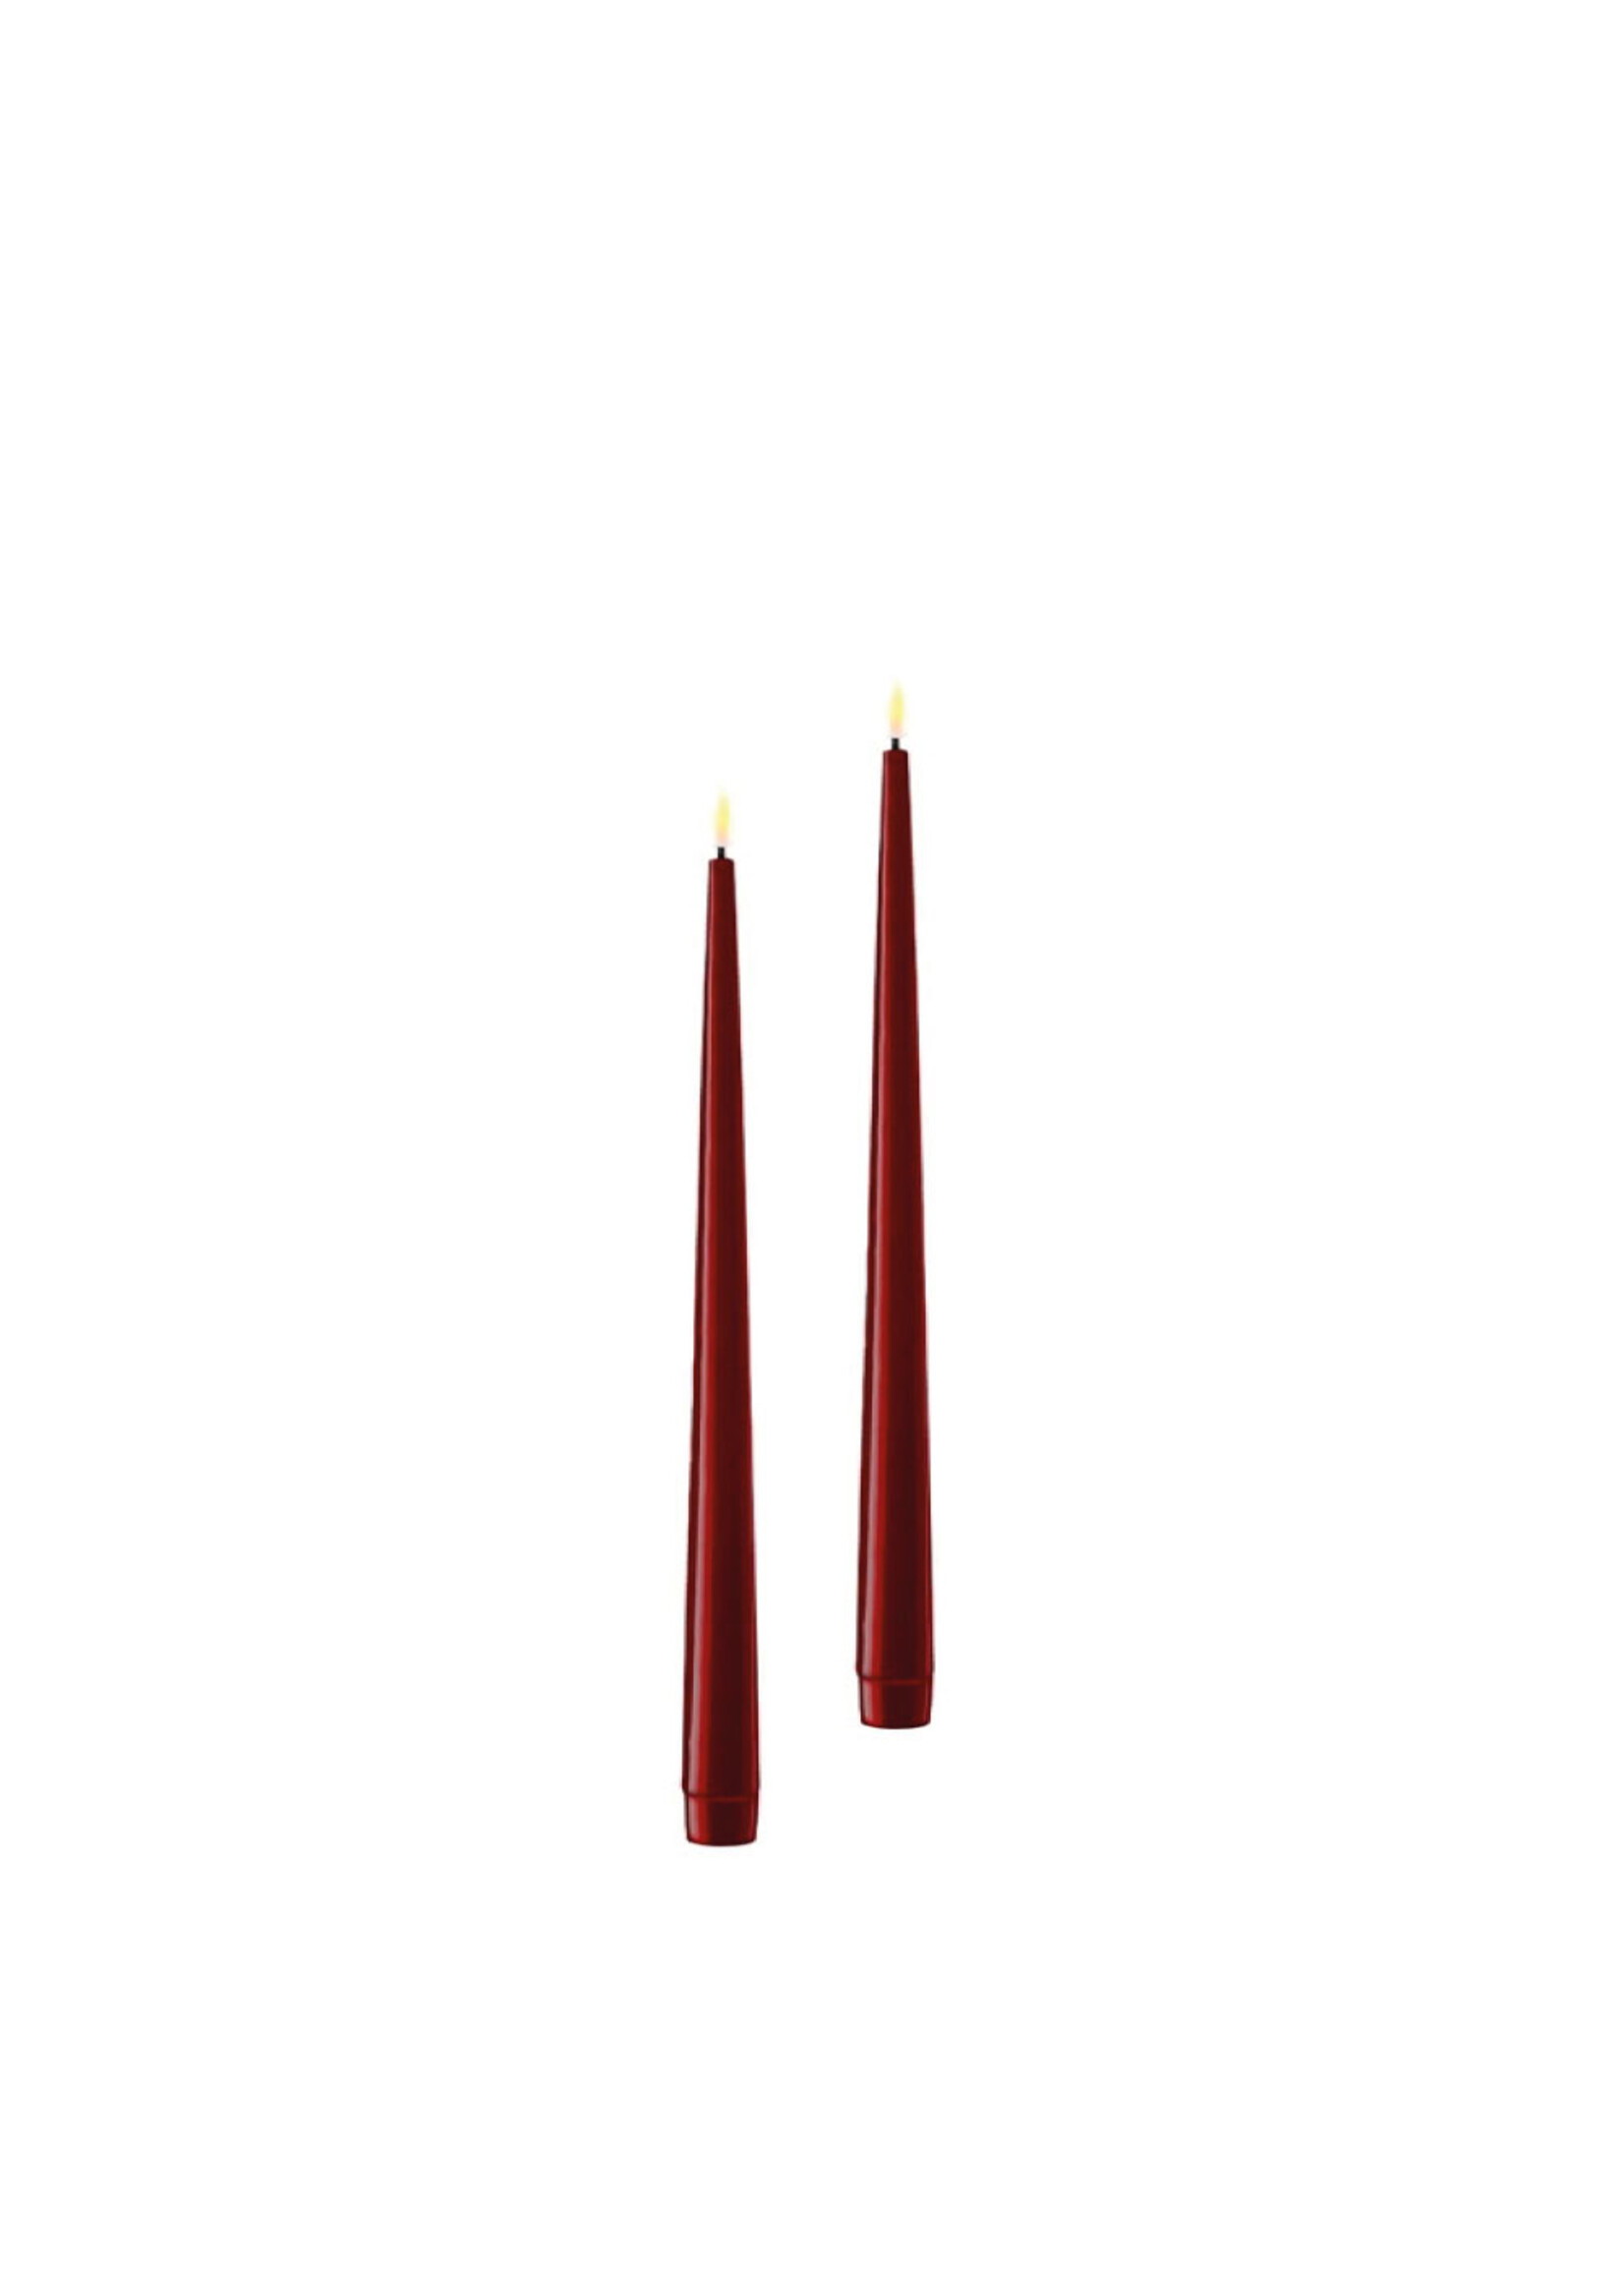 De Luxe Homeart Bourgogne Red LED Shiny Dinner Candle D: 2,2 * 38 cm (2 pcs,)